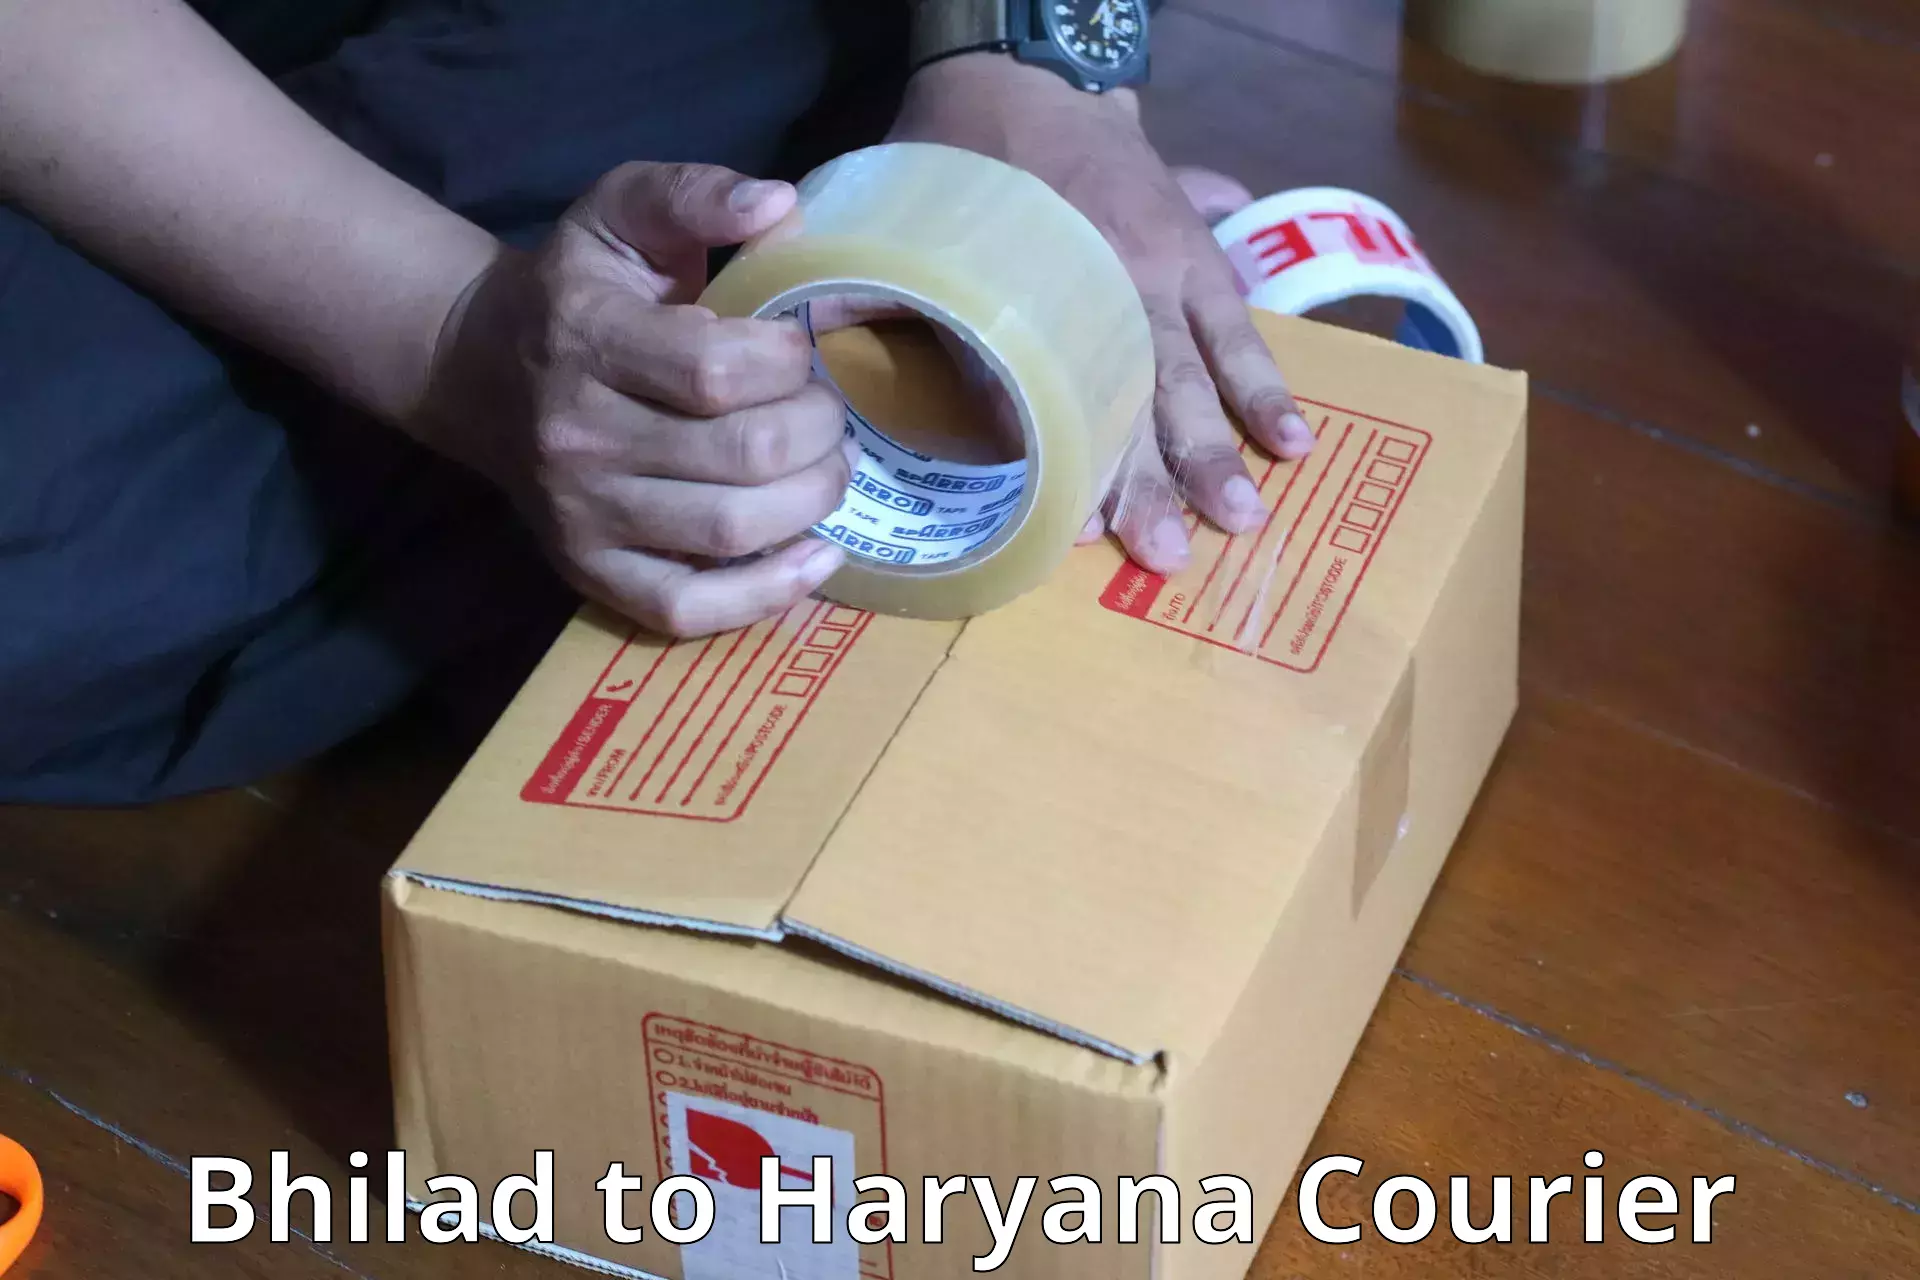 Baggage shipping experts Bhilad to Haryana